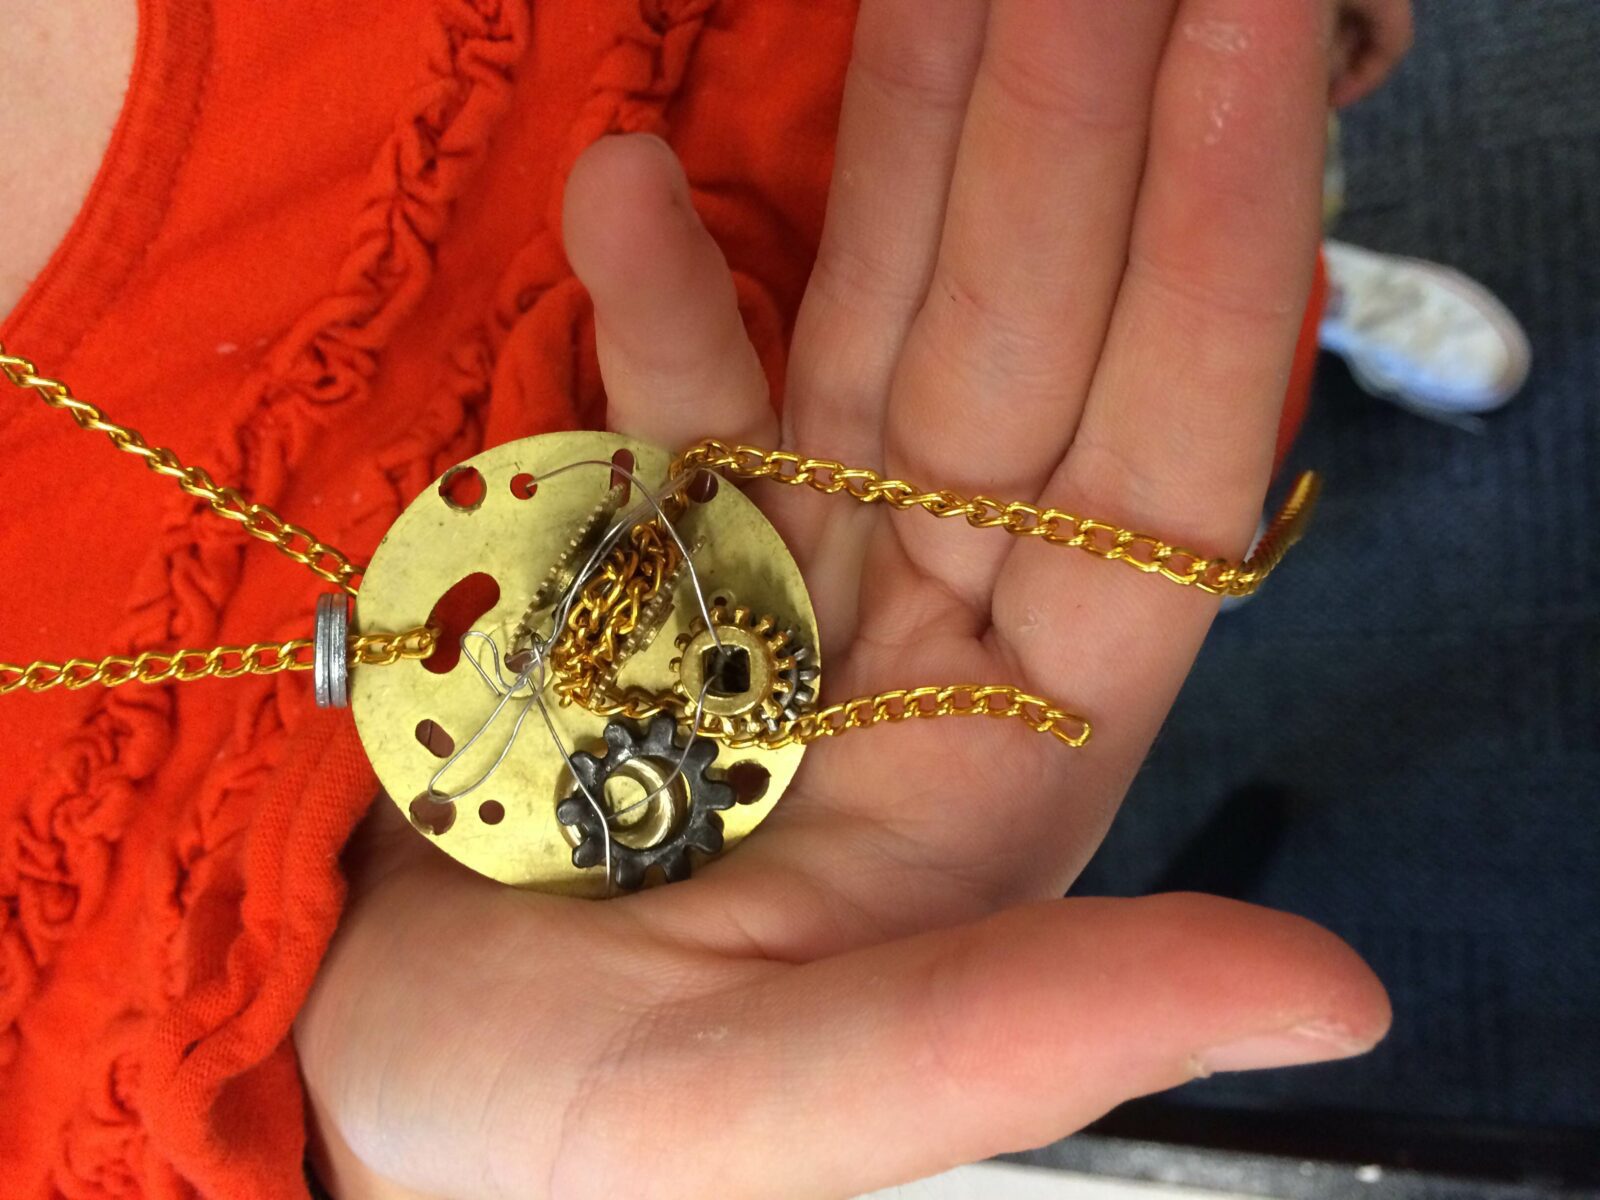 Steampunk jewelry at the Newton Free Library